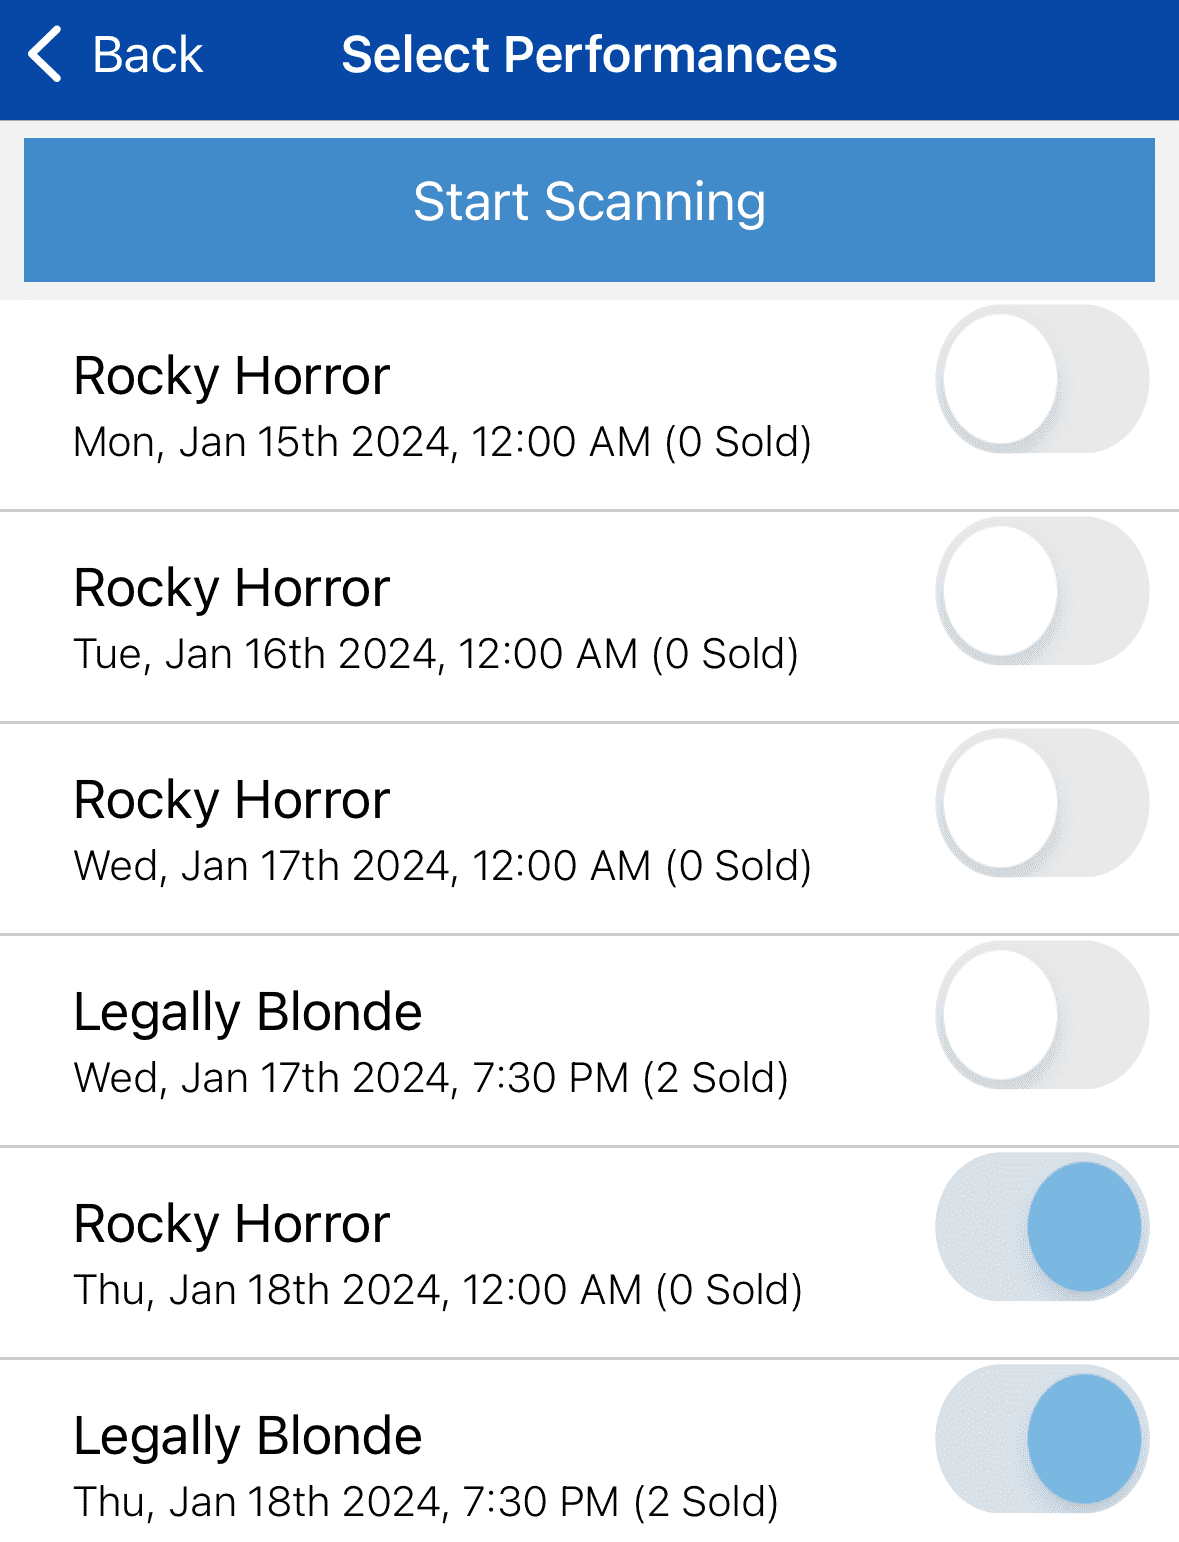 Select Performances Screen where a user can toggle 'start scanning' for specific events. 